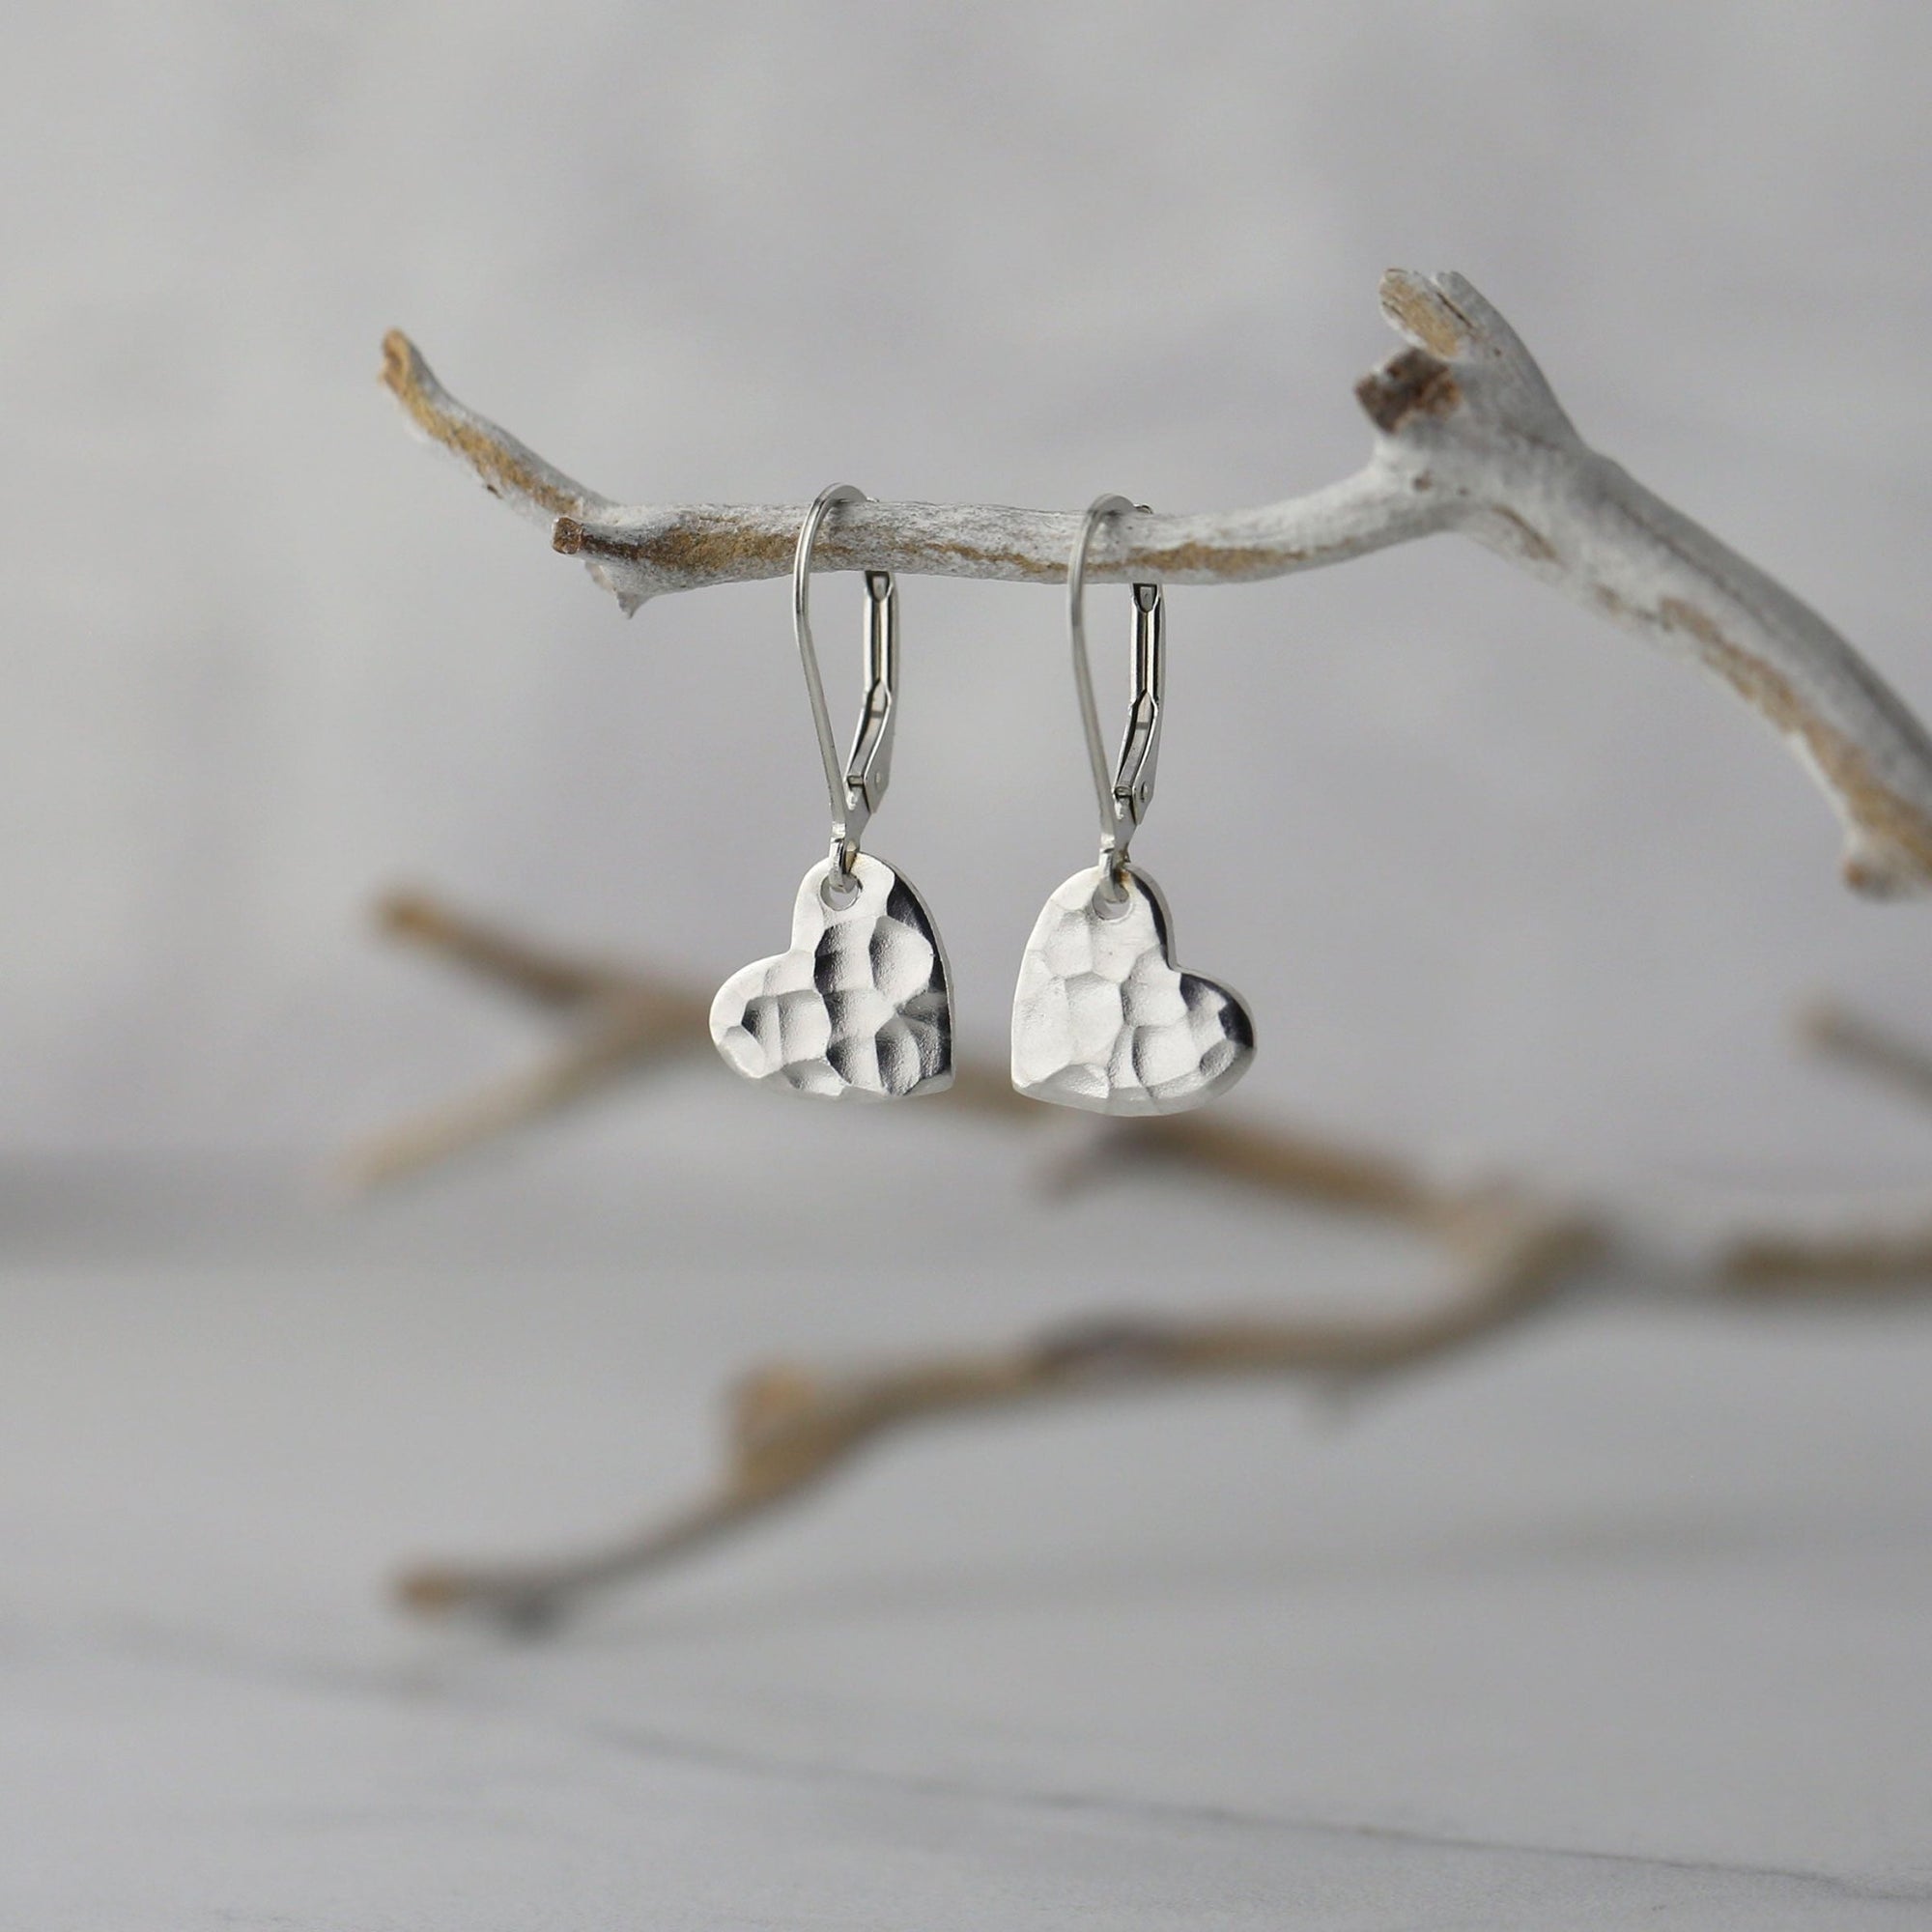 Small Hammered Heart Earrings handmade by Burnish